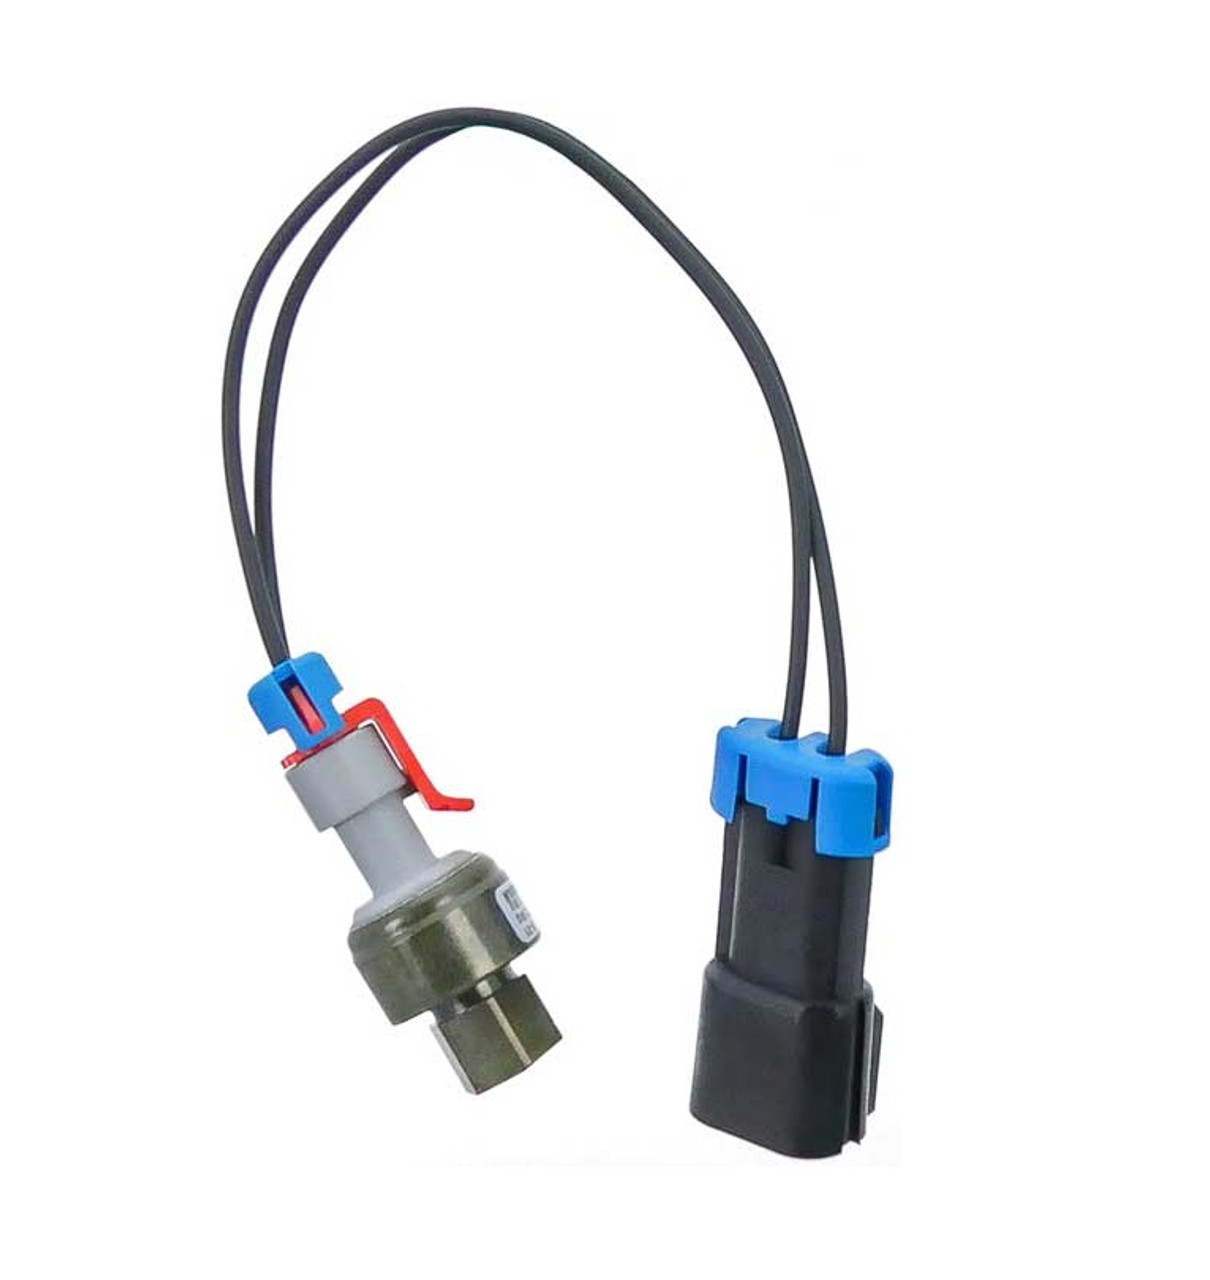 Red Dot Binary Low Pressure Switch with M10 Female Fitting and Harness -  Normally Closed - 71R6125 / RD-5-8946-0P